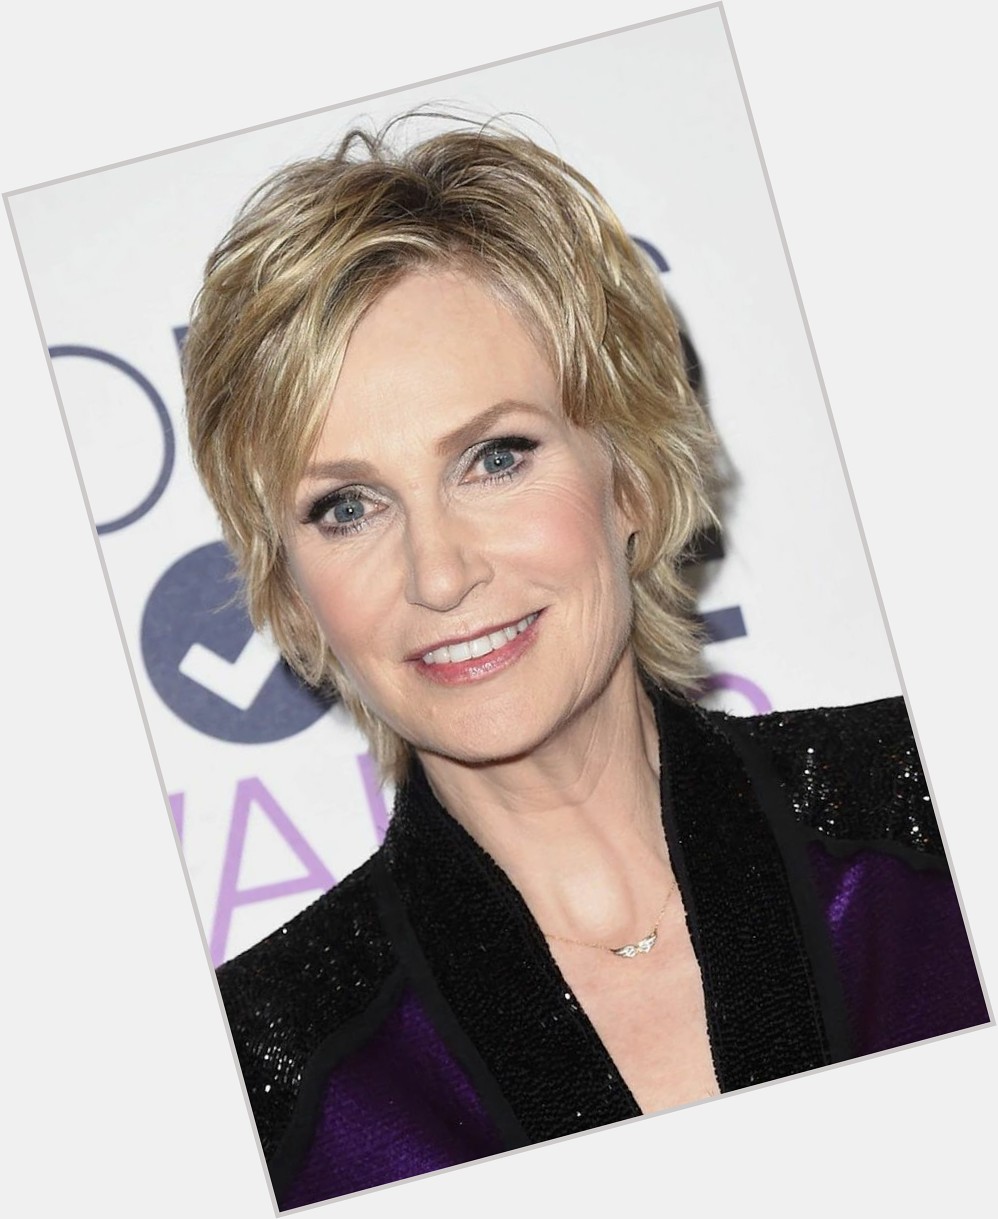 Happy Birthday film television actress game show host
Jane Lynch  